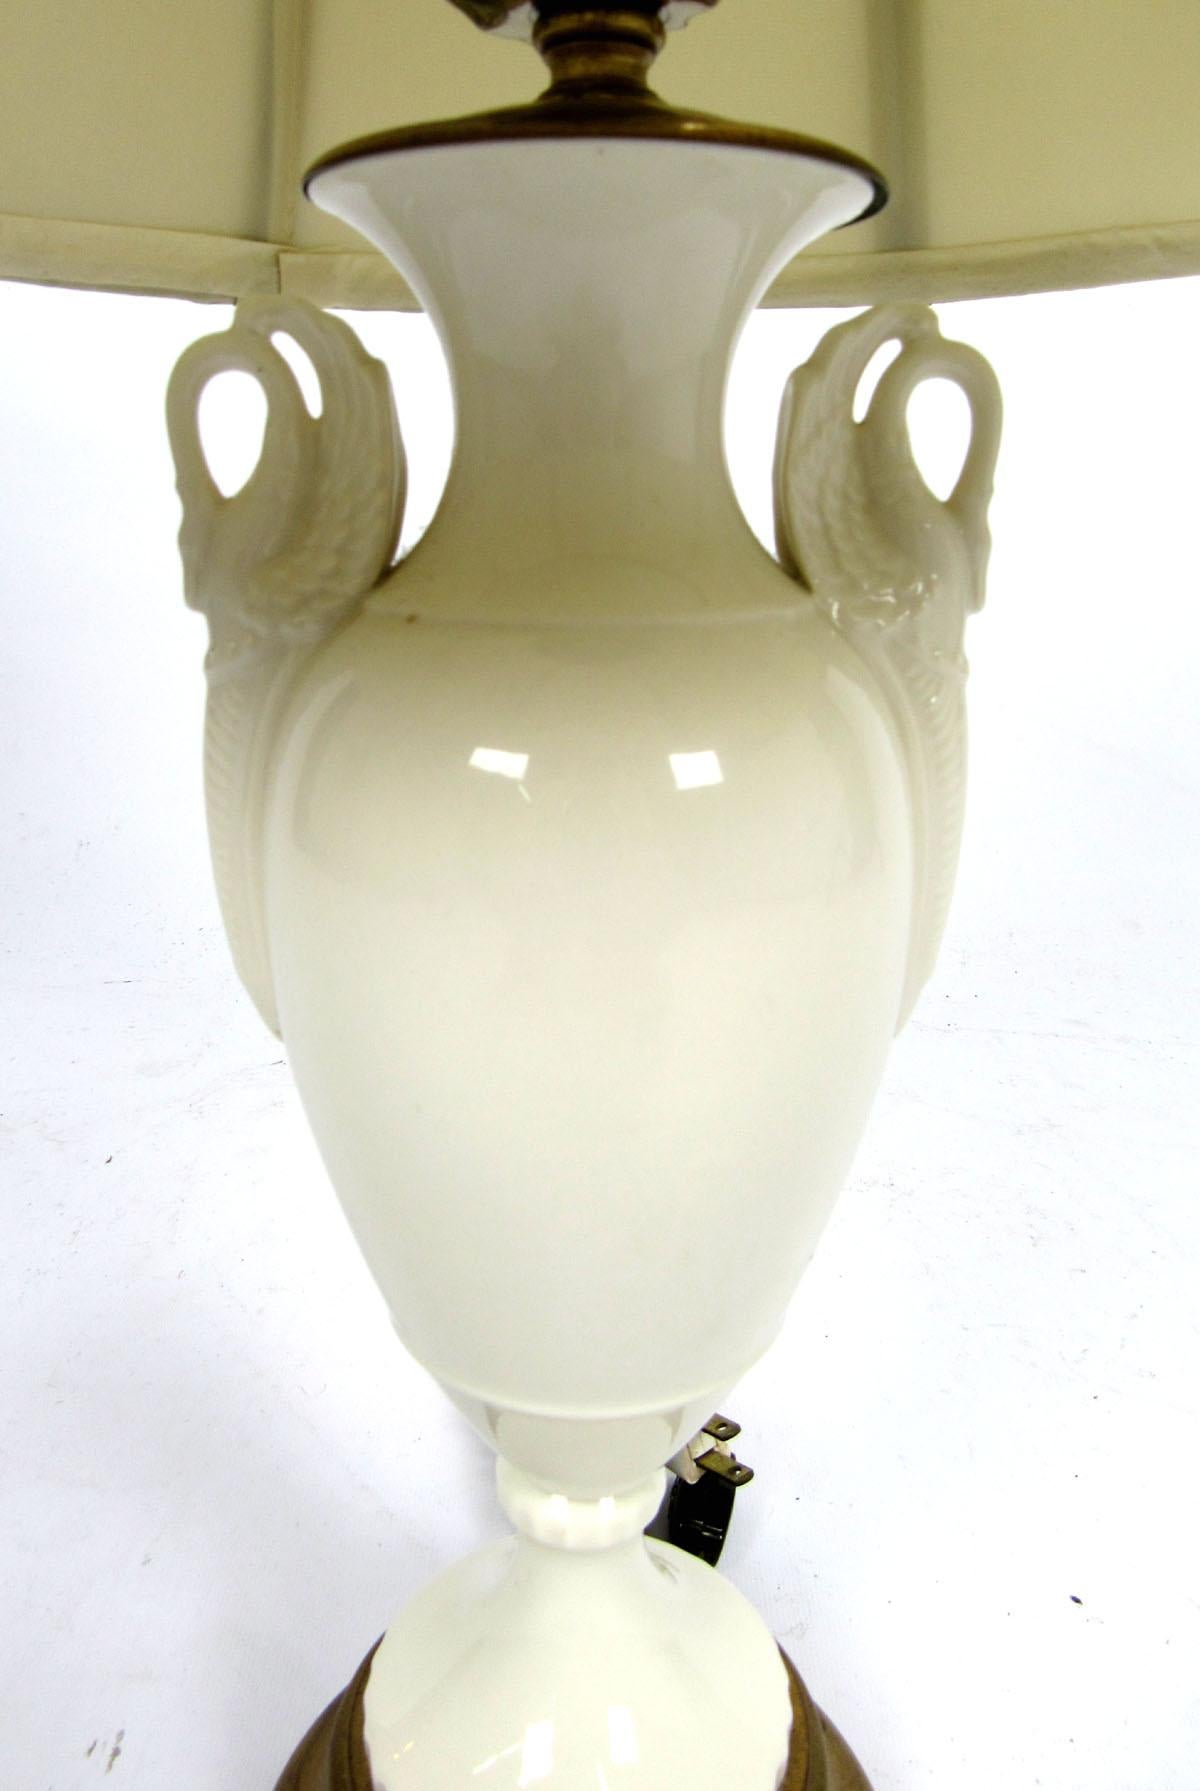 White porcelain lamp by Lenox with swans on the neck and gold trim.